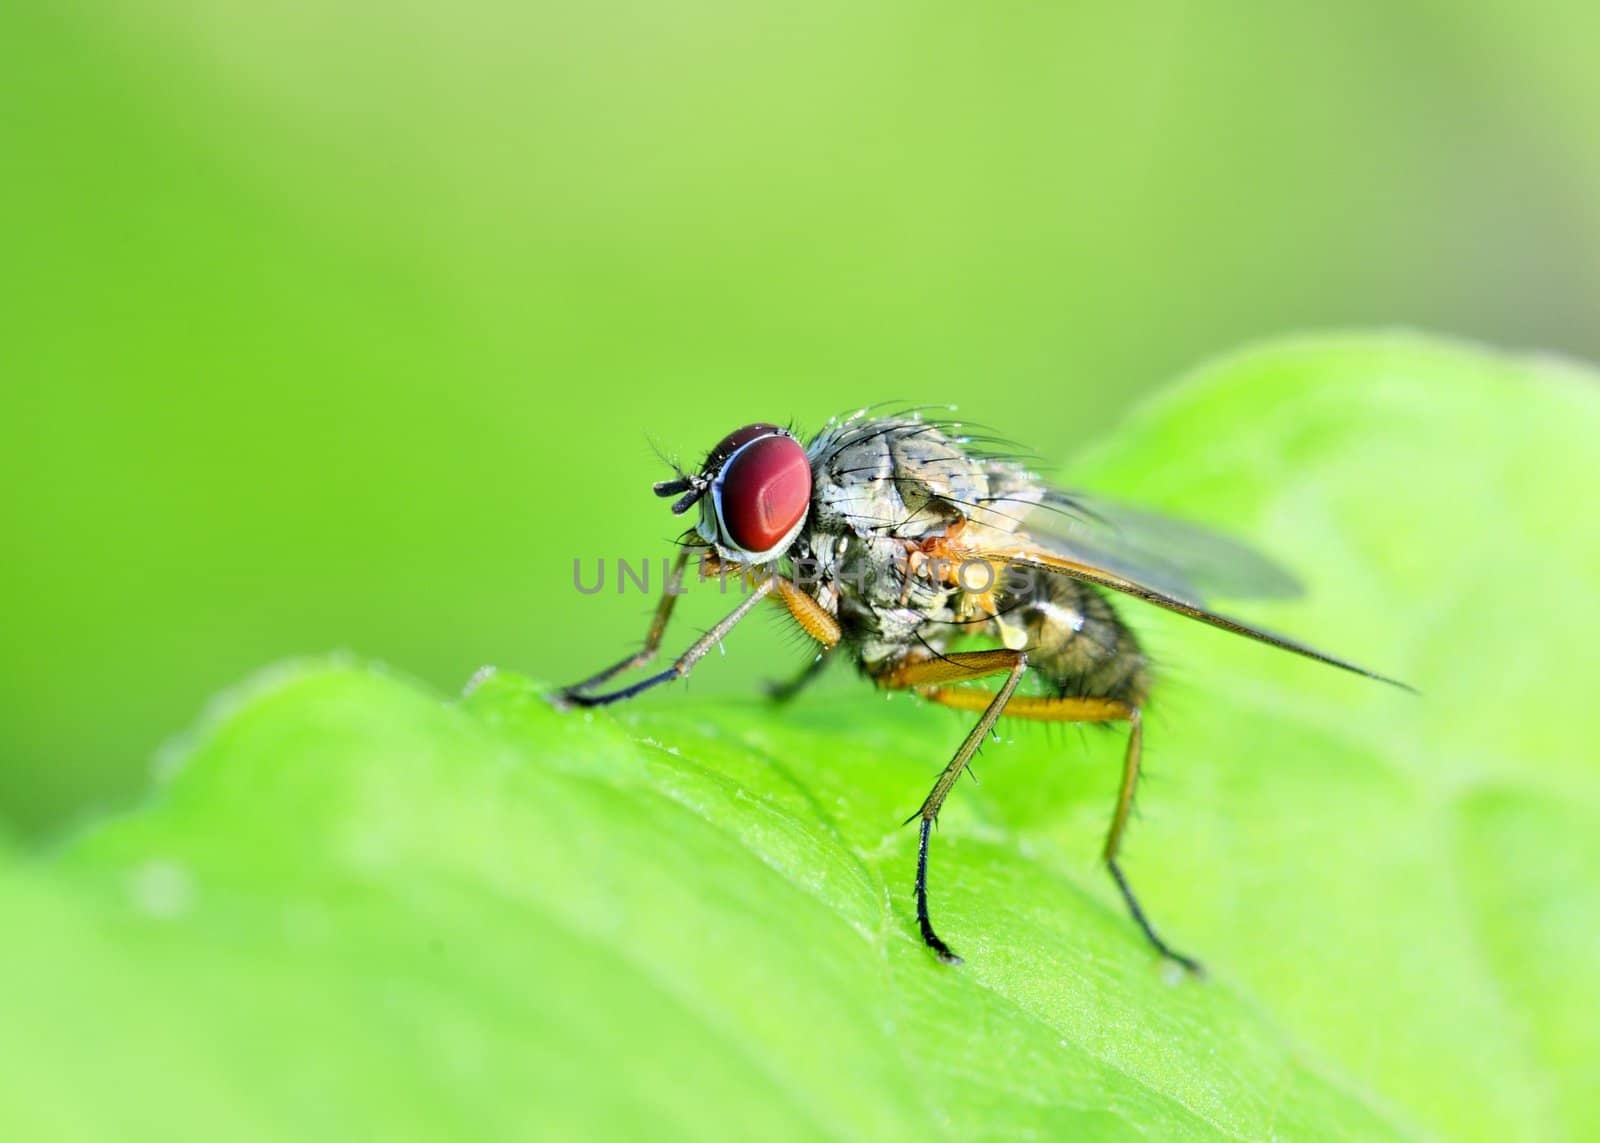 A tachinid fly perched on a green leaf.